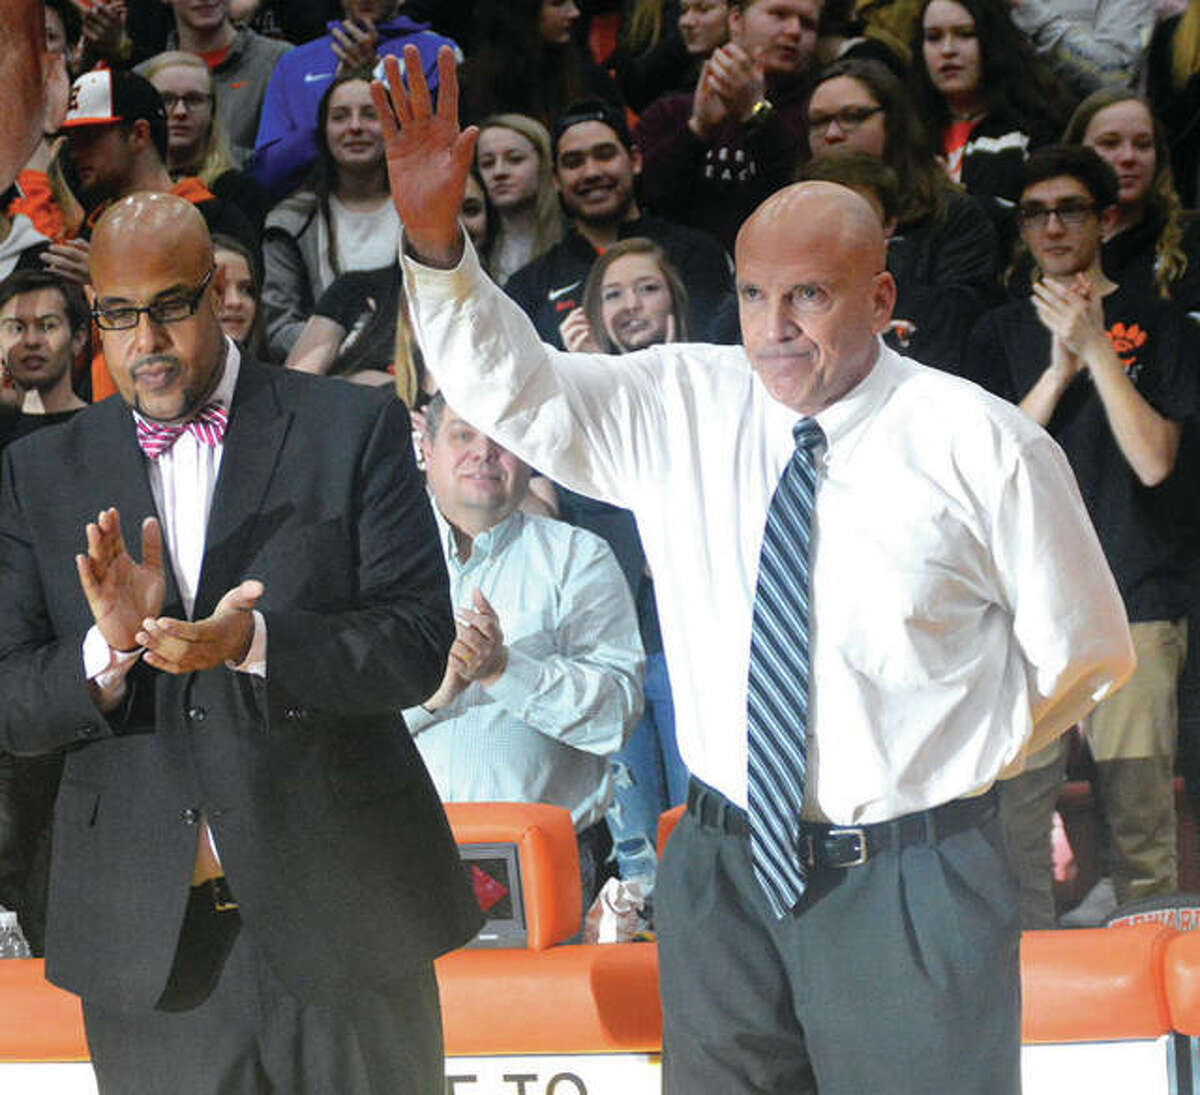 Edwardsville coach Mike Waldo, right, acknowledges the crowd during a pregame ceremony before Friday’s game against Belleville East. It was Waldo’s final home game as coach. EHS athletic director Alex Fox at left.